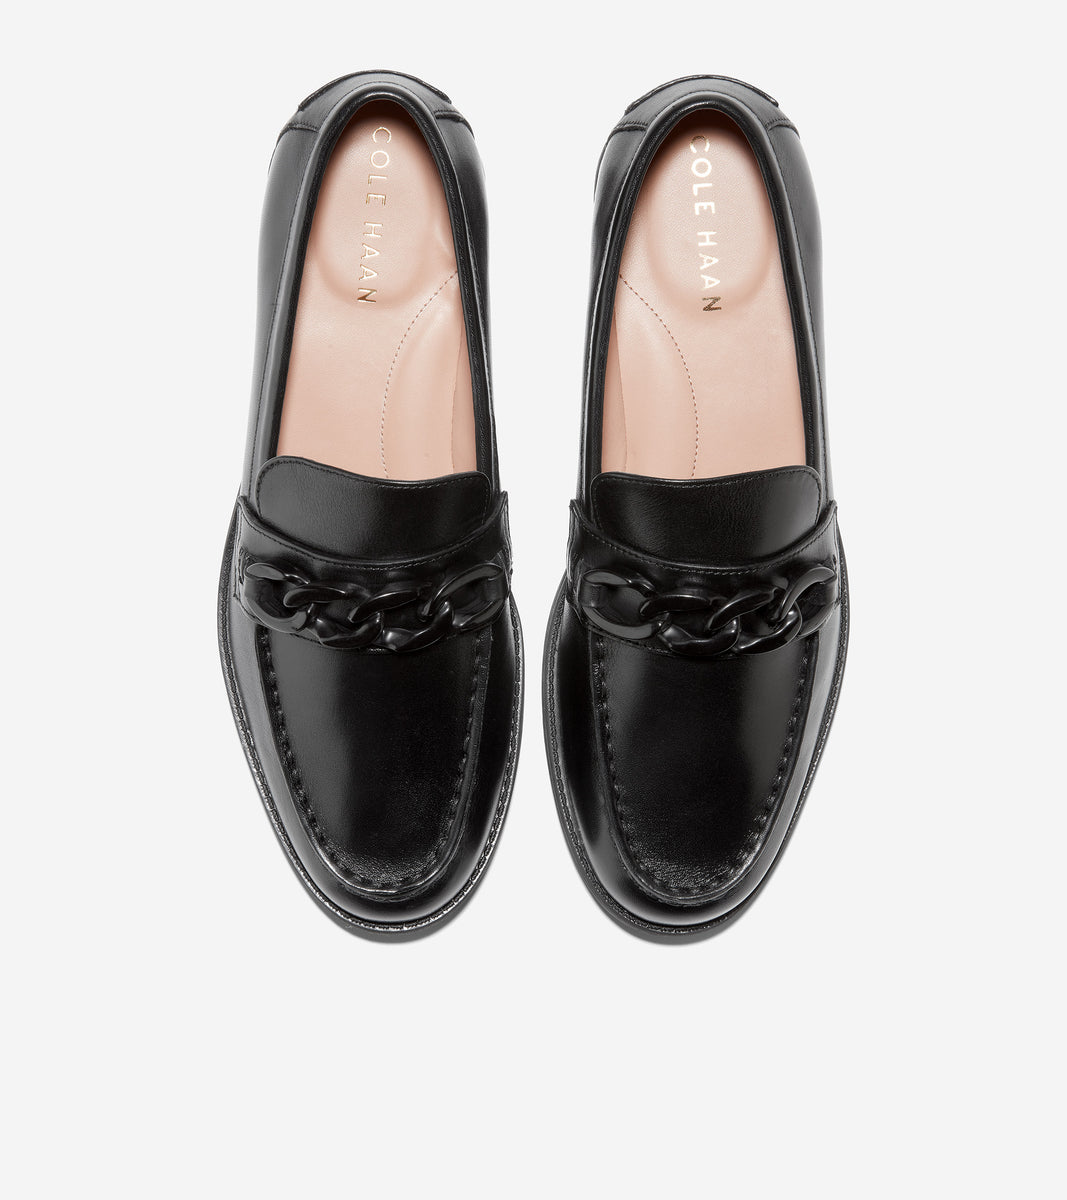 w27246-Women's Stassi Chain Loafer-Black Leather